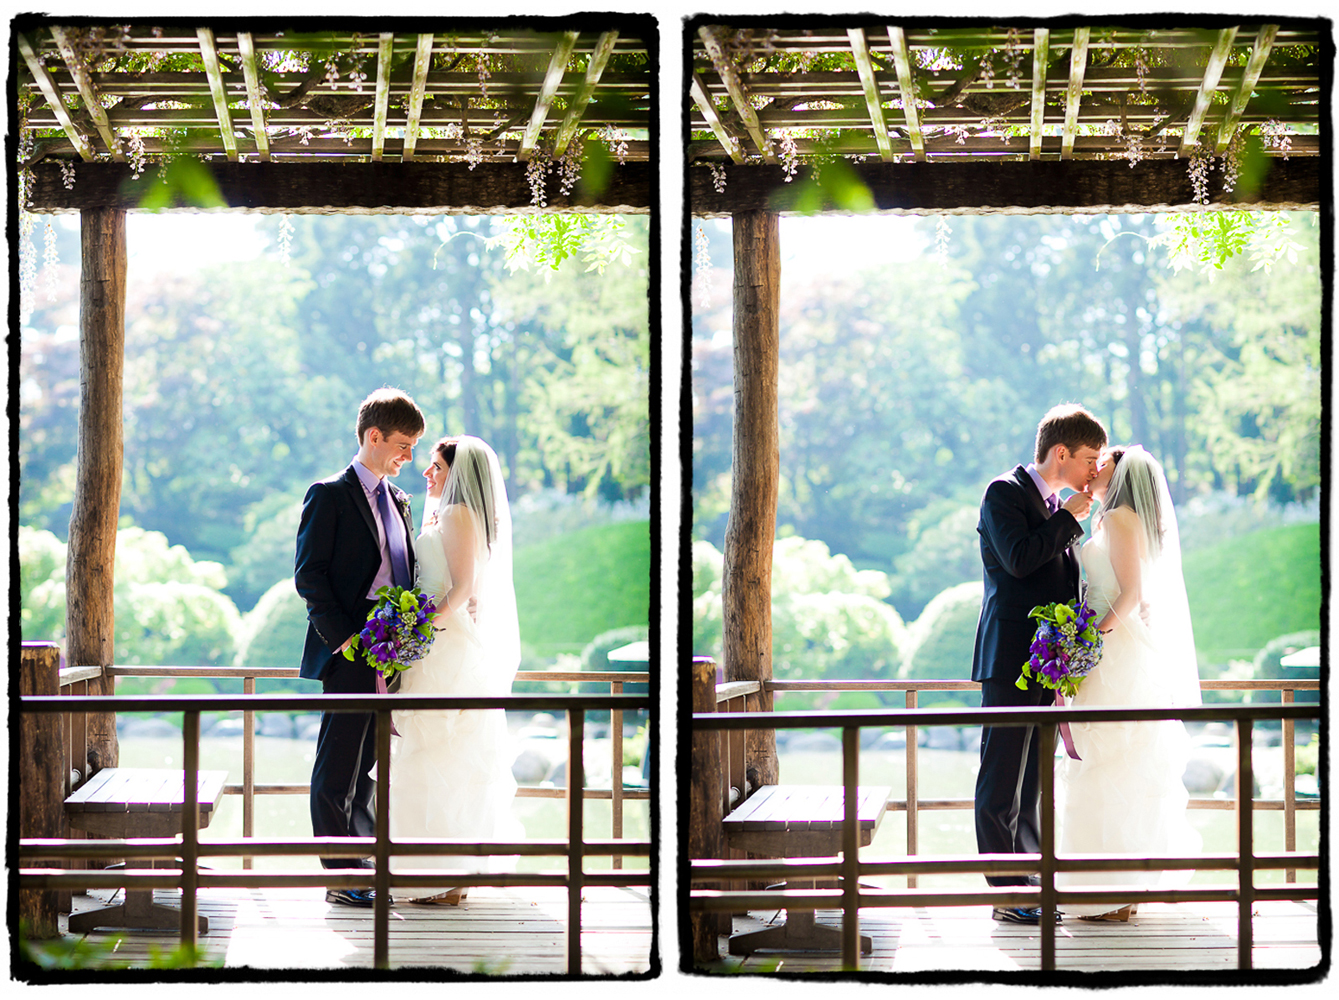 Deena & Joe share a kiss under a pergola at Brooklyn Botanic Garden before heading to the Palm House to celebrate at their reception.